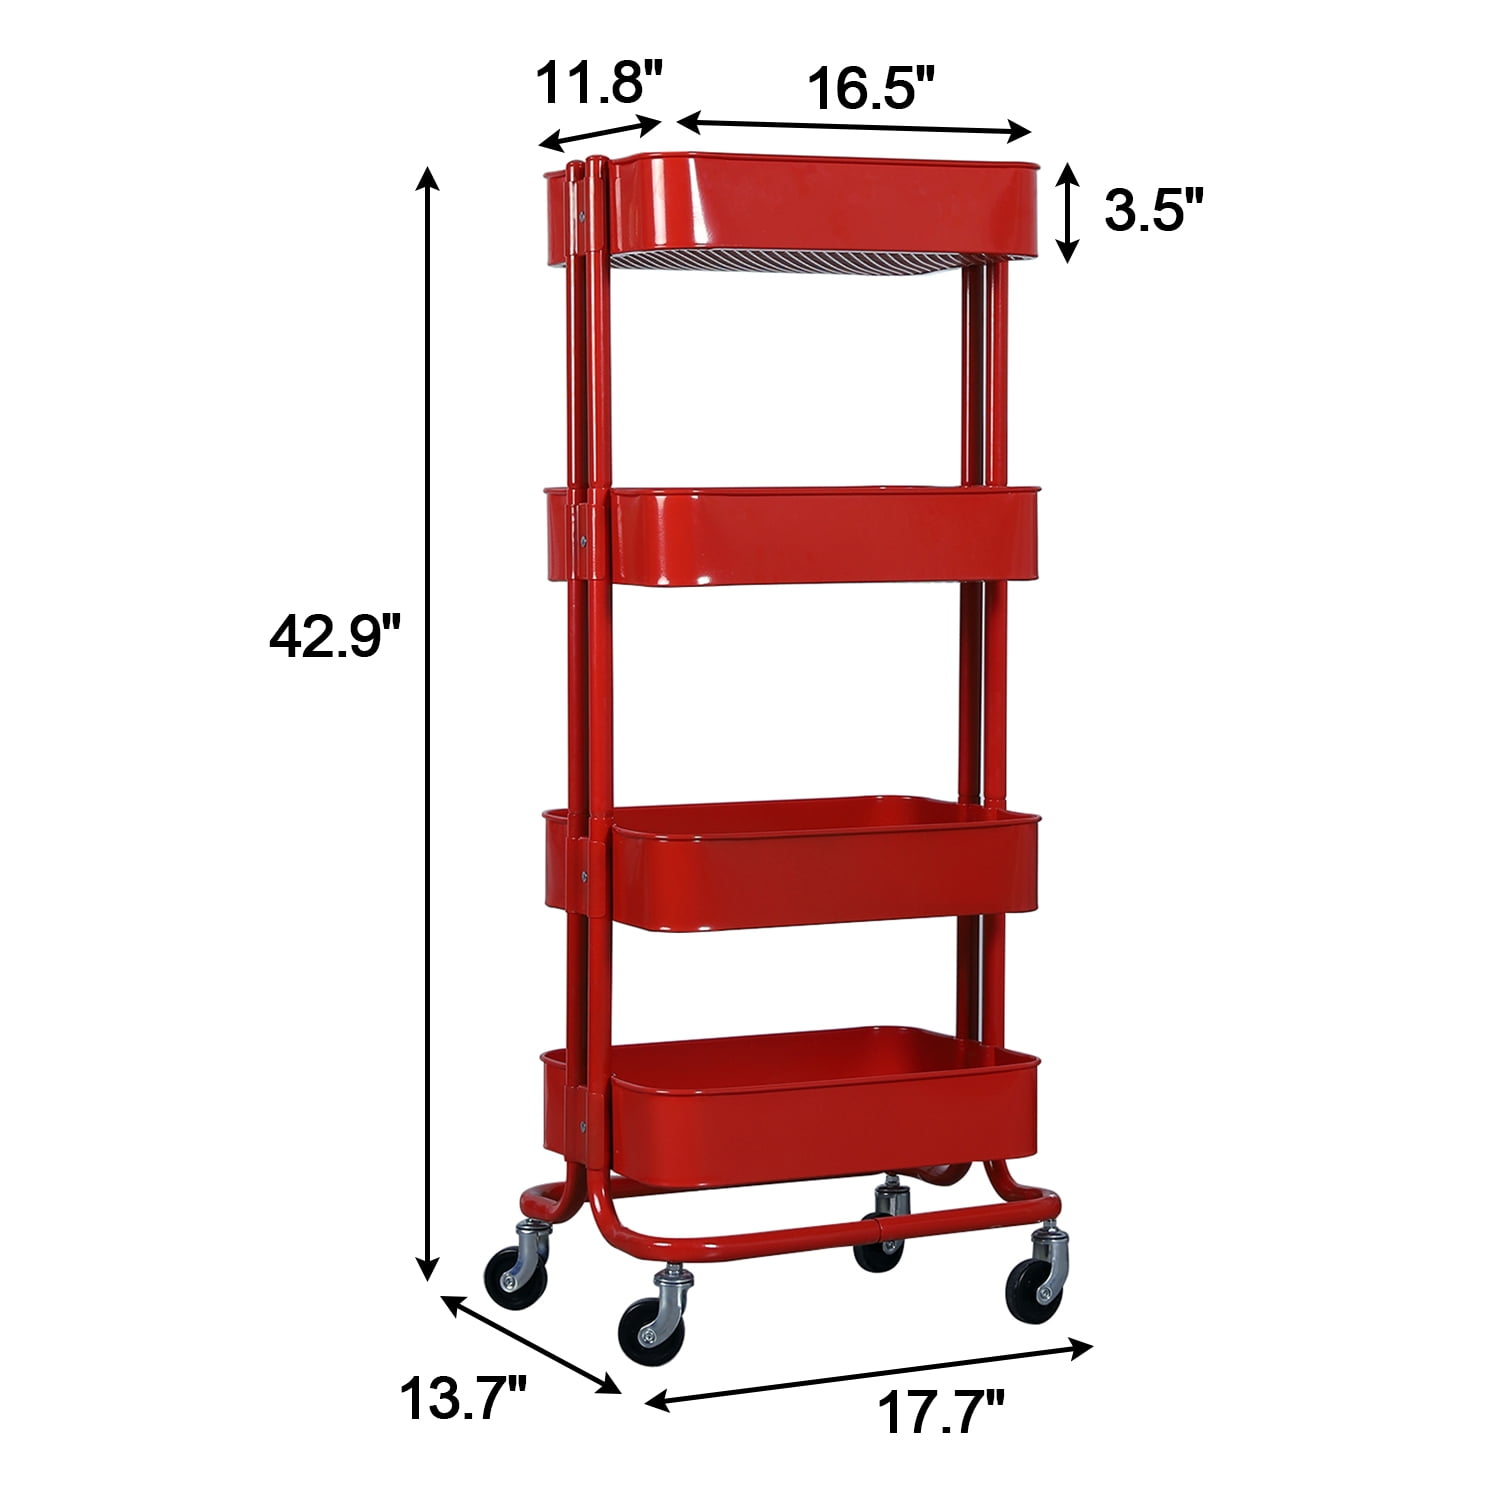 Details about   4Tier Rolling Utility Cart Basket Kitchen Bathroom Storage Rack Stand Tool Y801C 